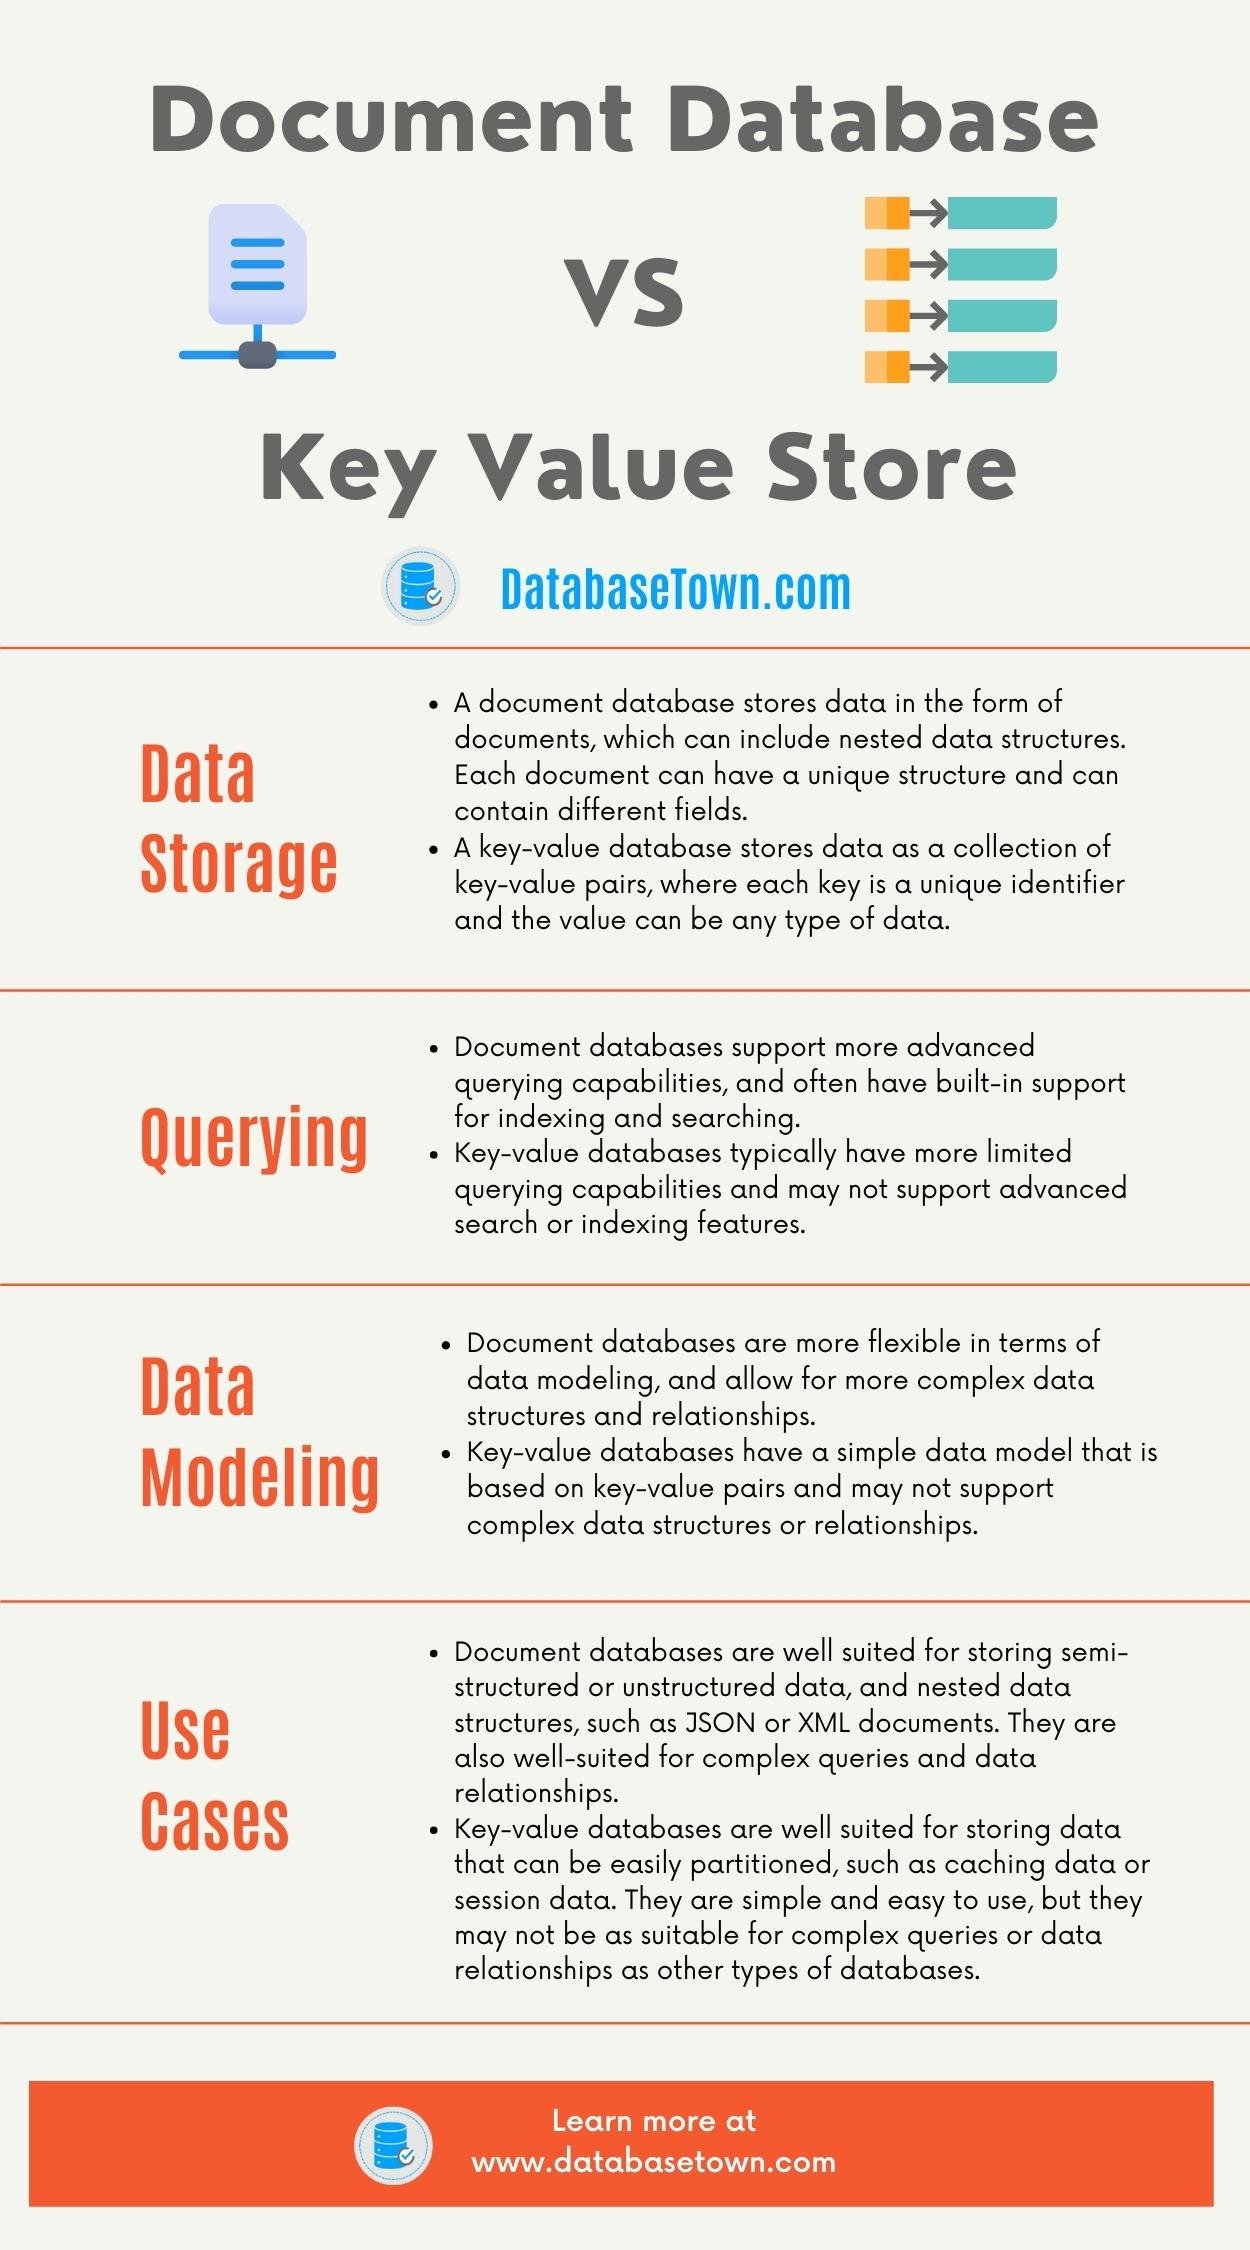 Difference between Document Database VS Key Value